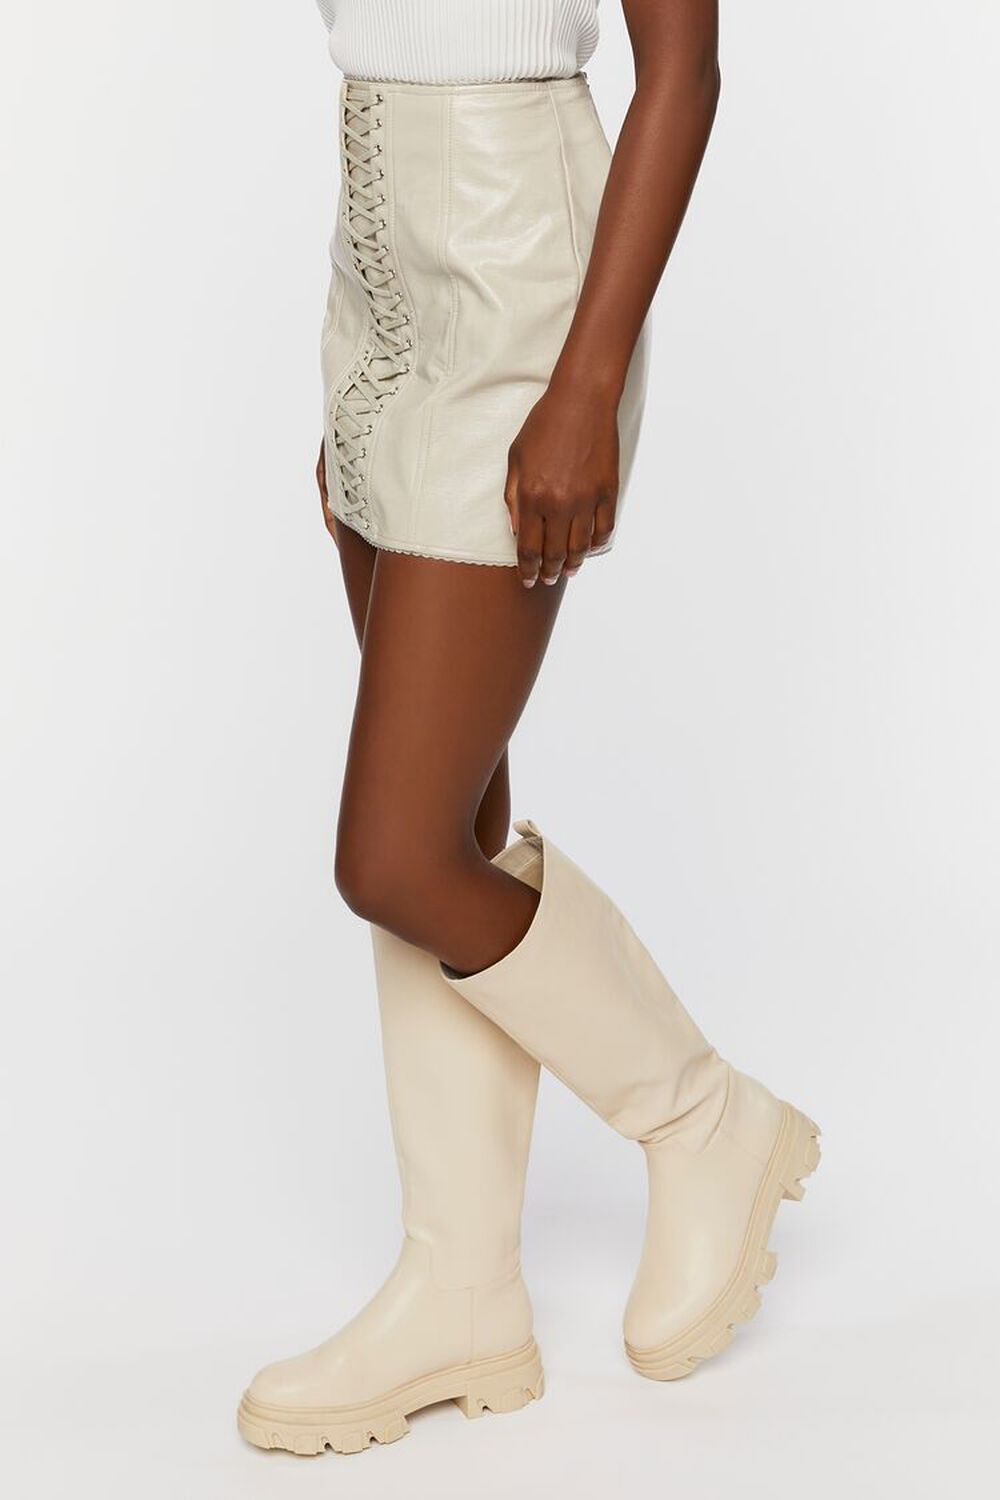 BEIGE Faux Leather Lace-Up Mini Skirt, image 3